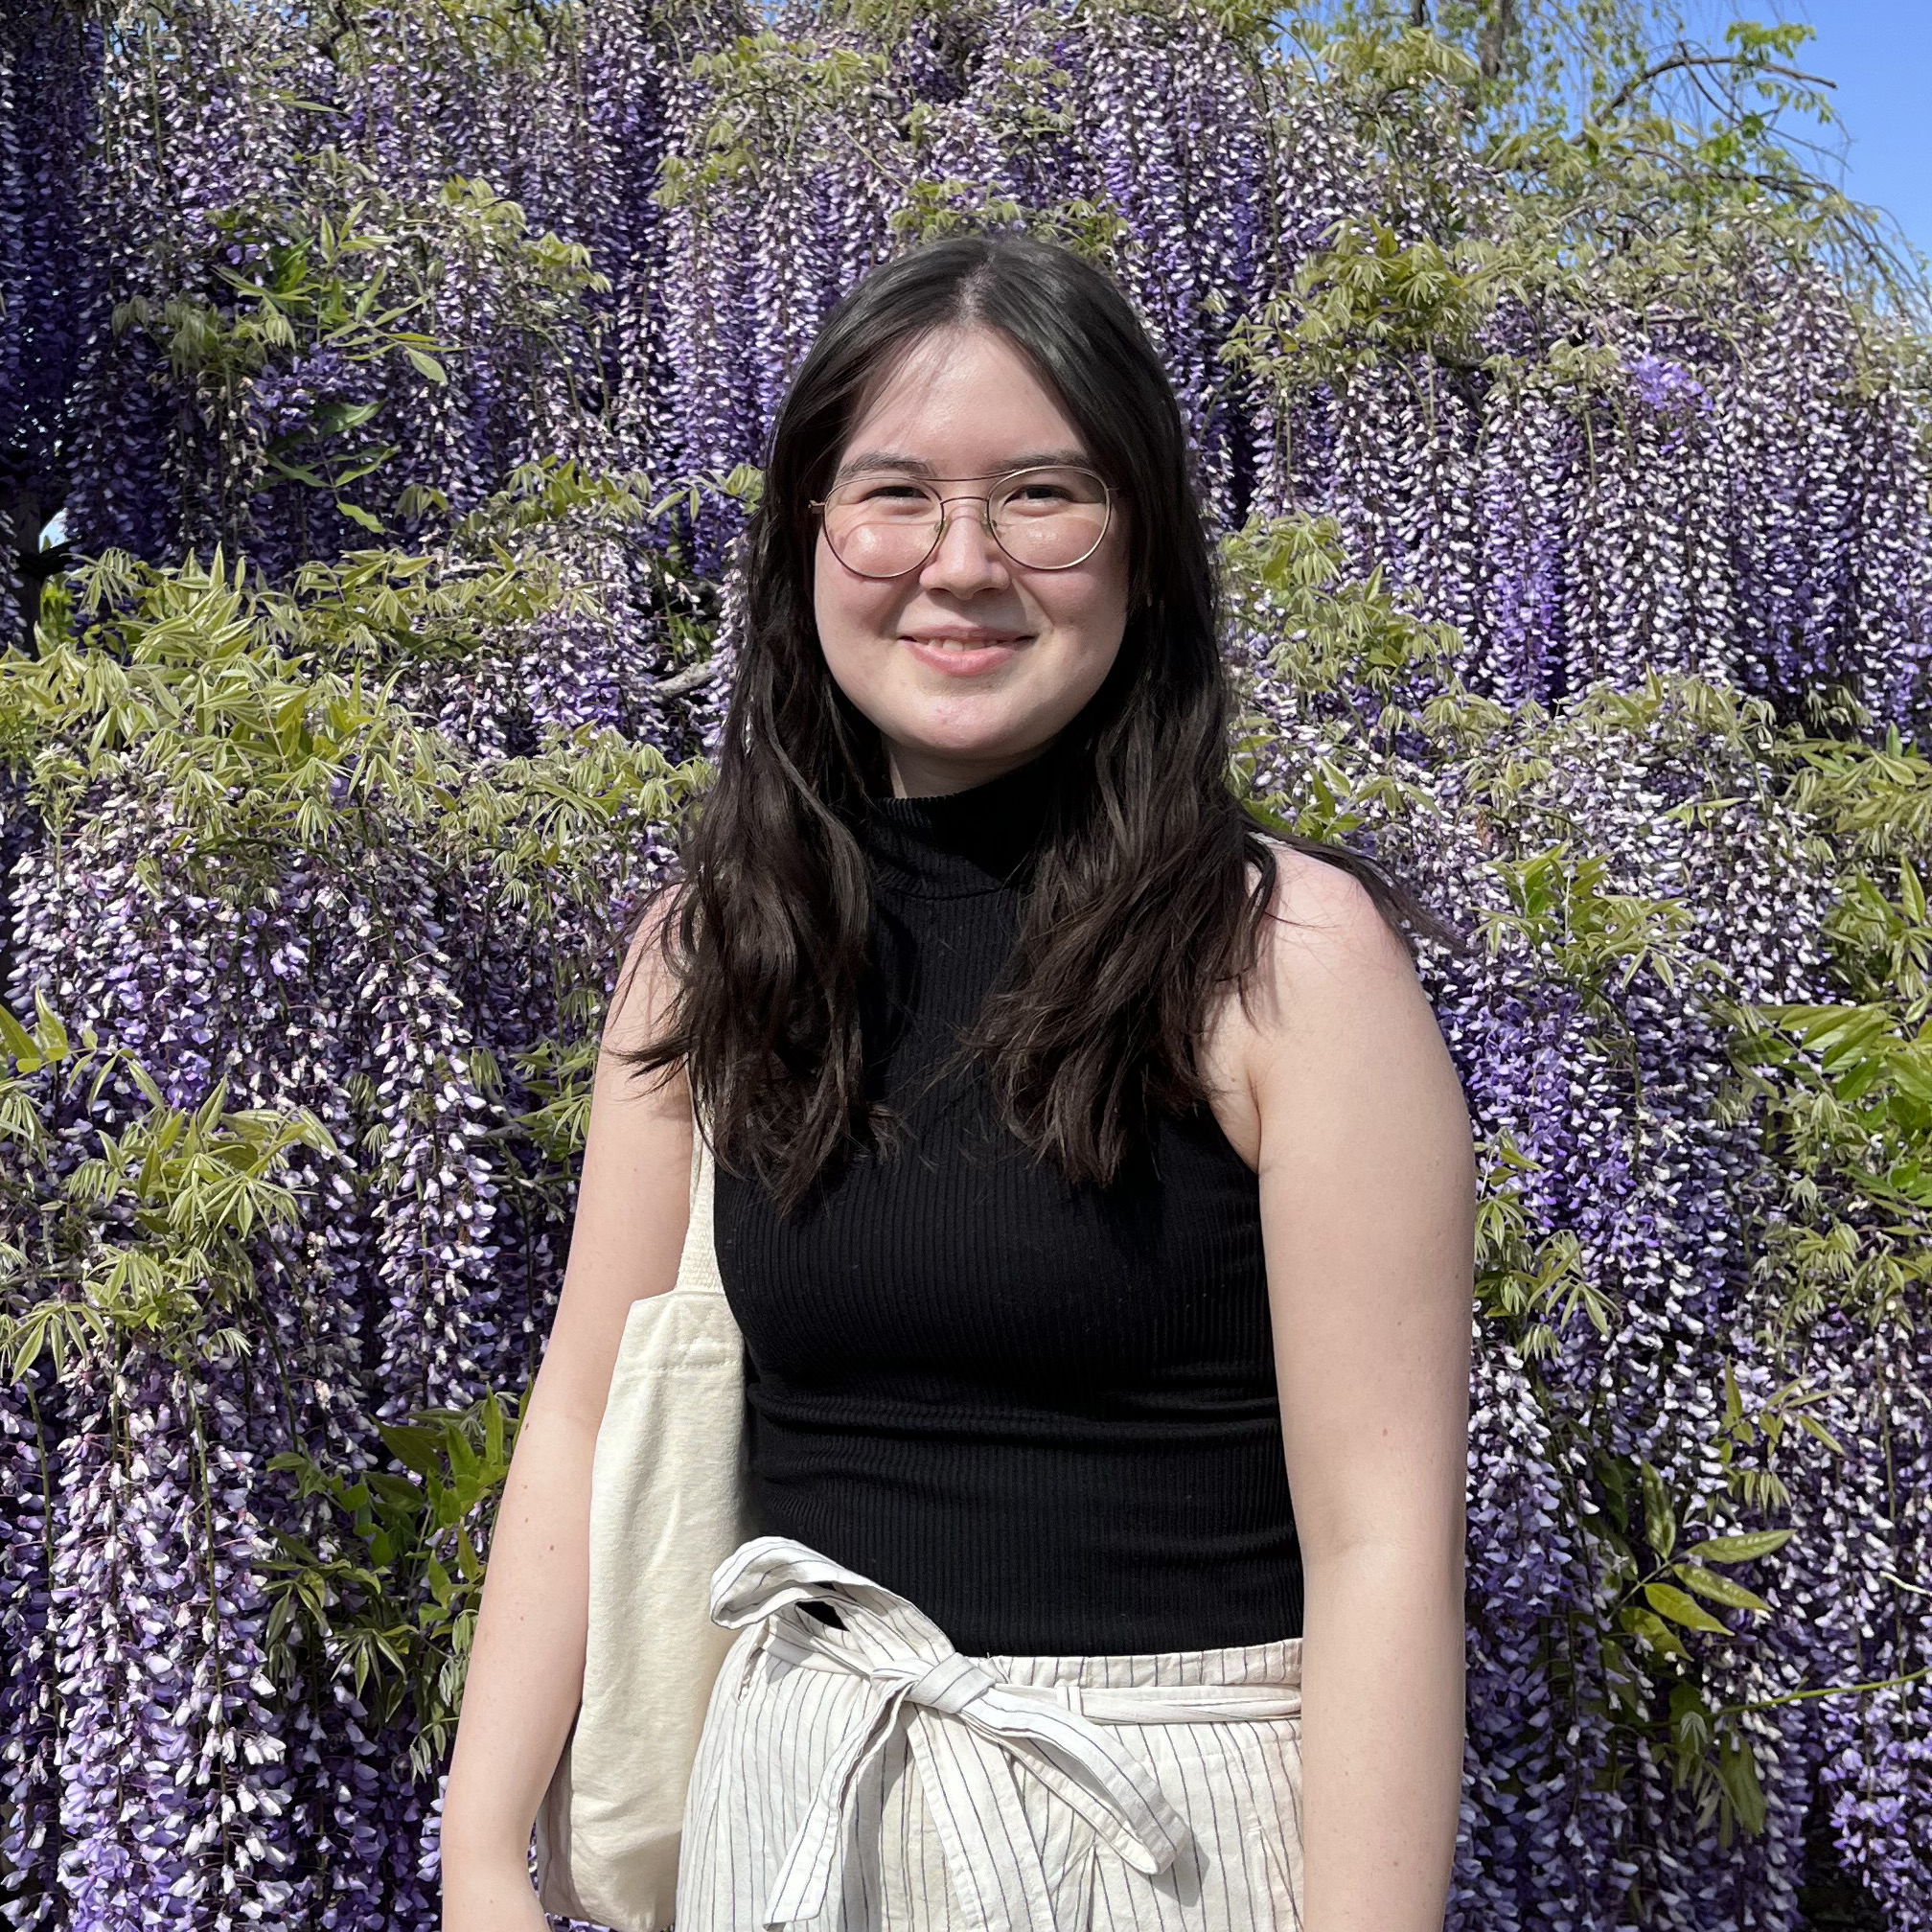 A bright, outdoor photo of Kyoko Telfer. She is standing in front of a forest of trees with cascading purple flowers. She has big glasses with thin rims and long, dark hair.